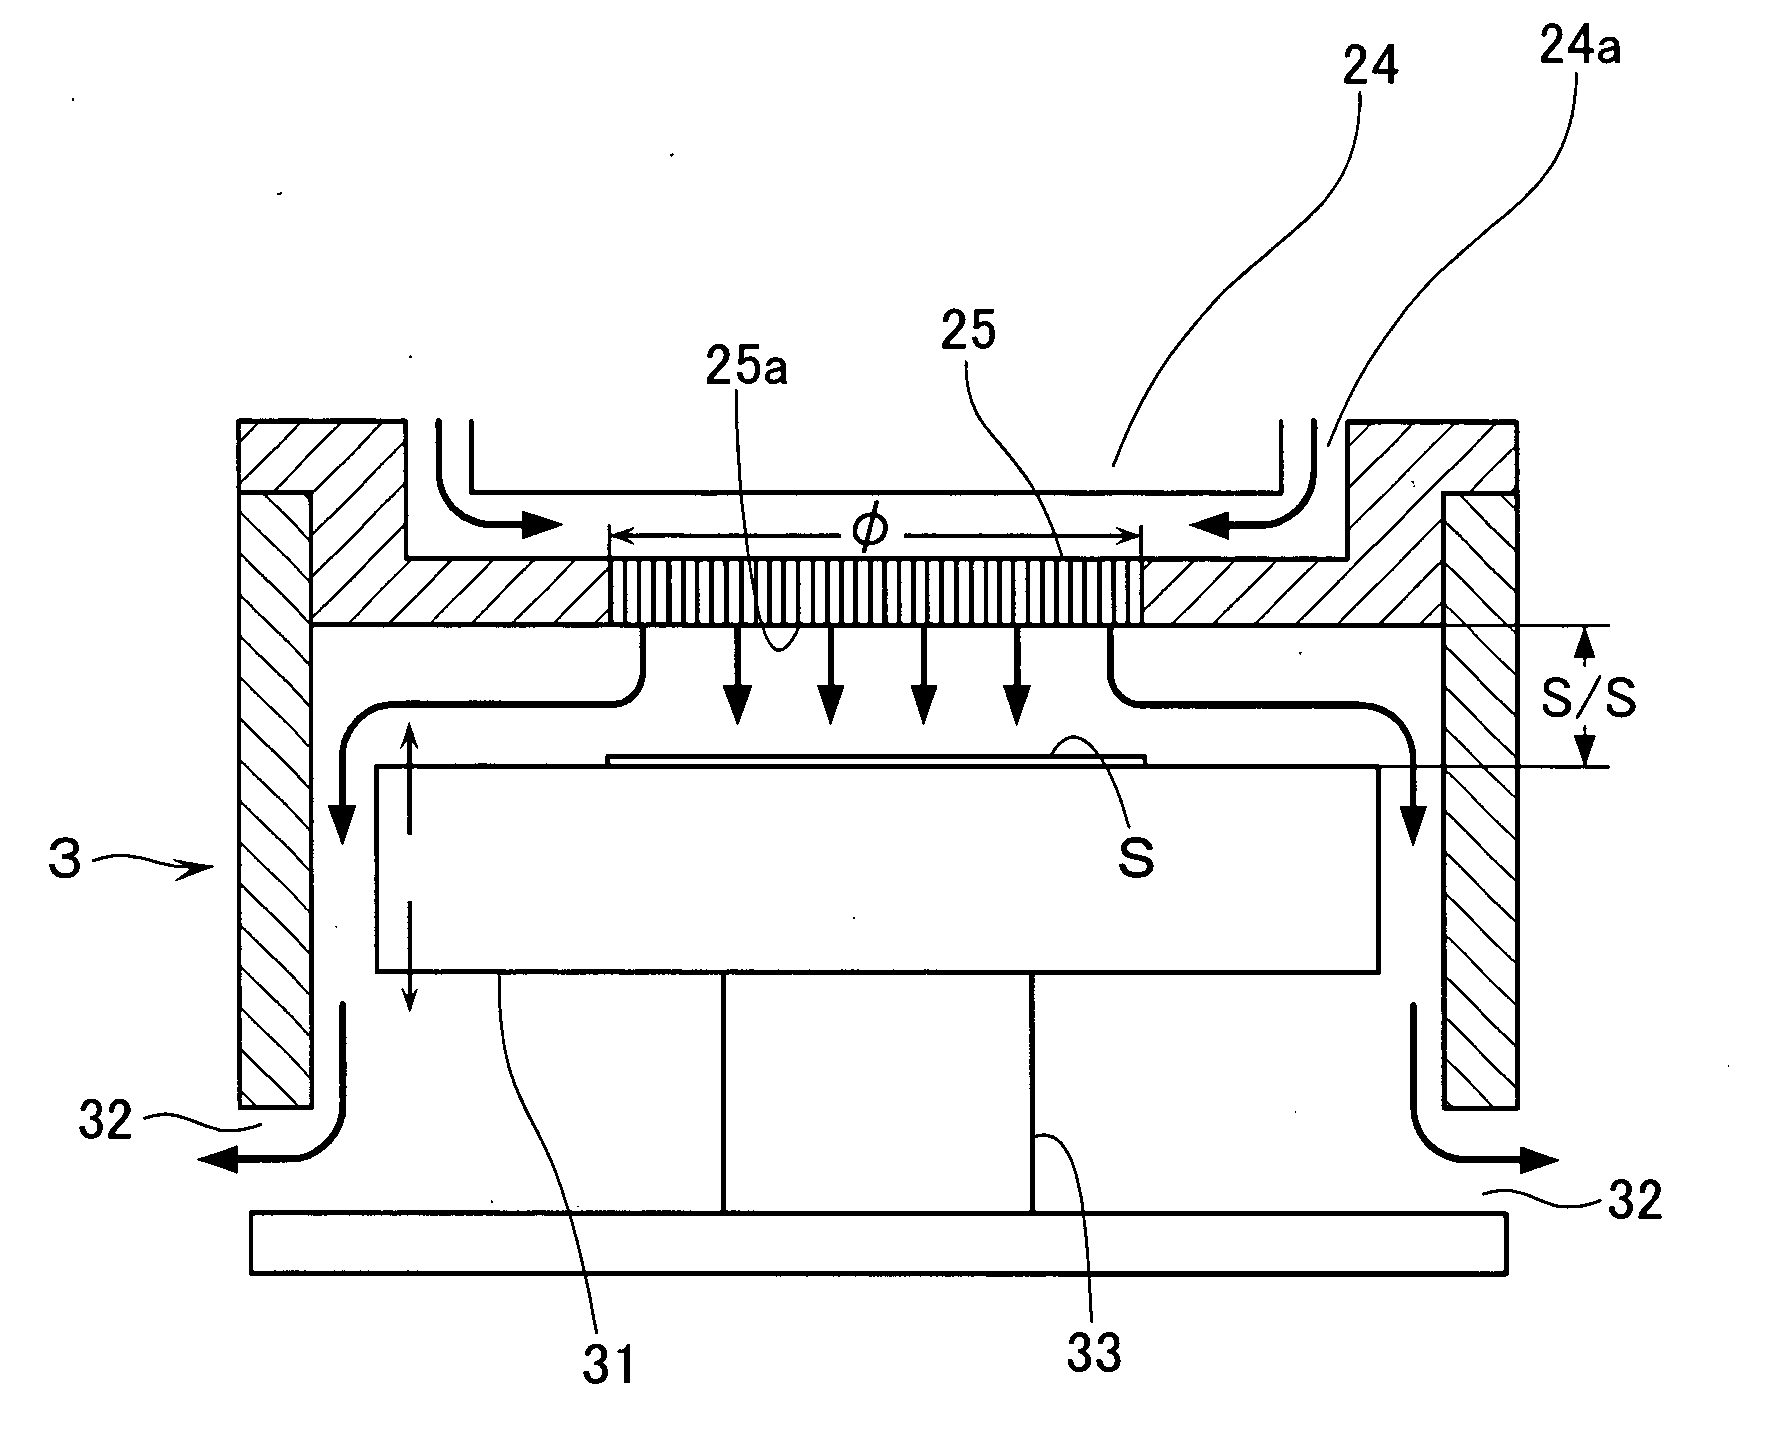 Apparatus for the preparation of film